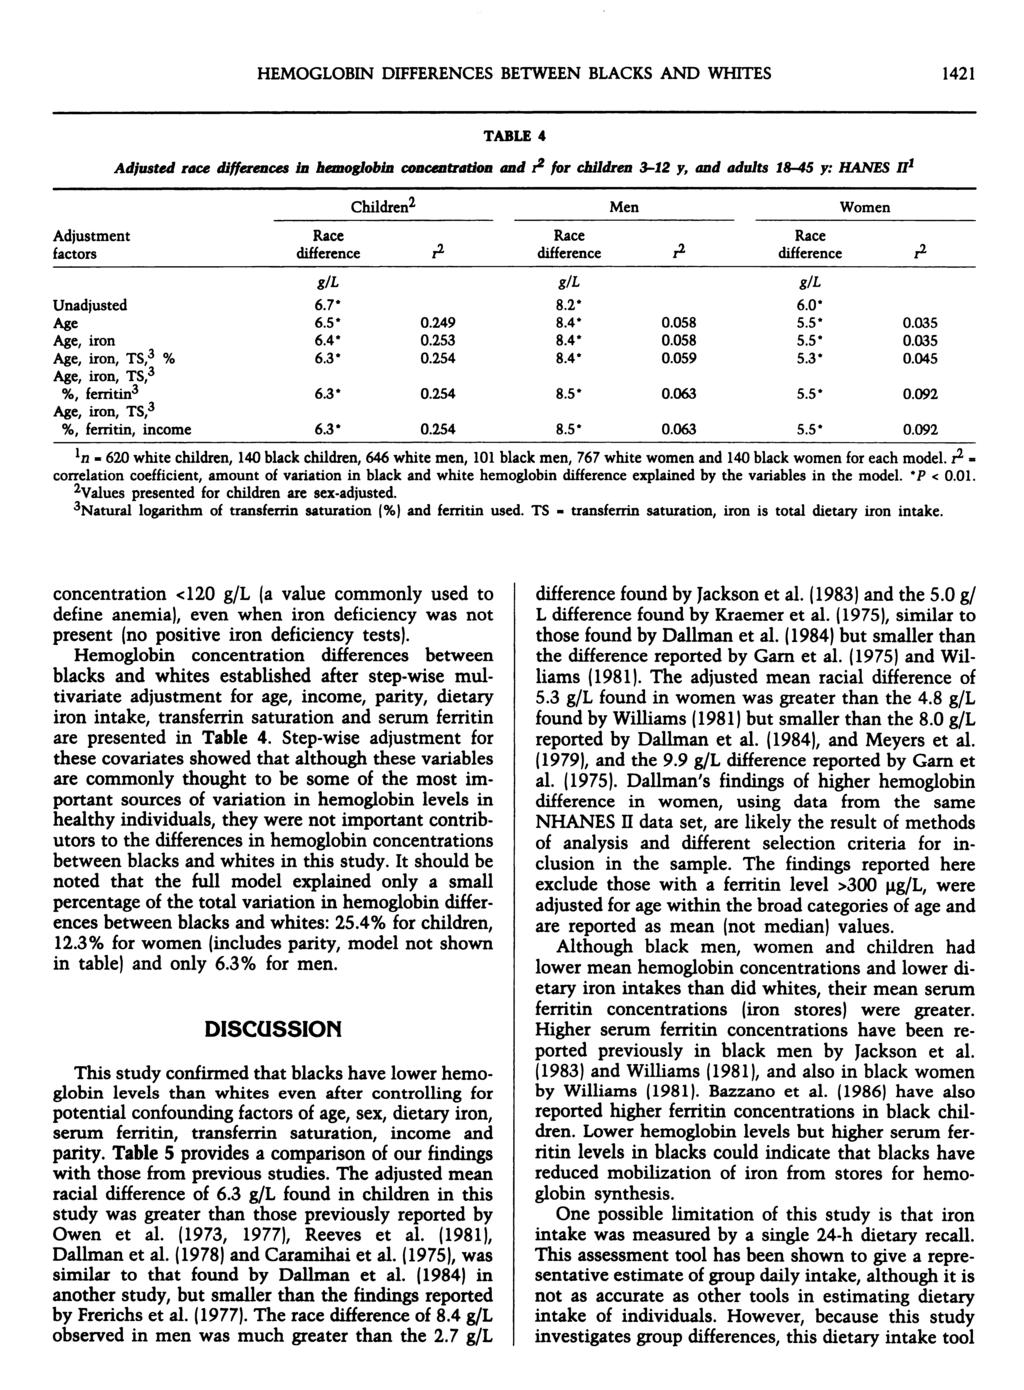 HEMOGLOBIN DIFFERENCES BETWEEN BLACKS AND WHITES 1421 TABLE 4 Adjusted race differences in hemglbin cncentratin and r fr children 3-12 y, and adults 1&-45 y: HANES II1 Children2 Men Wmen Adjustment